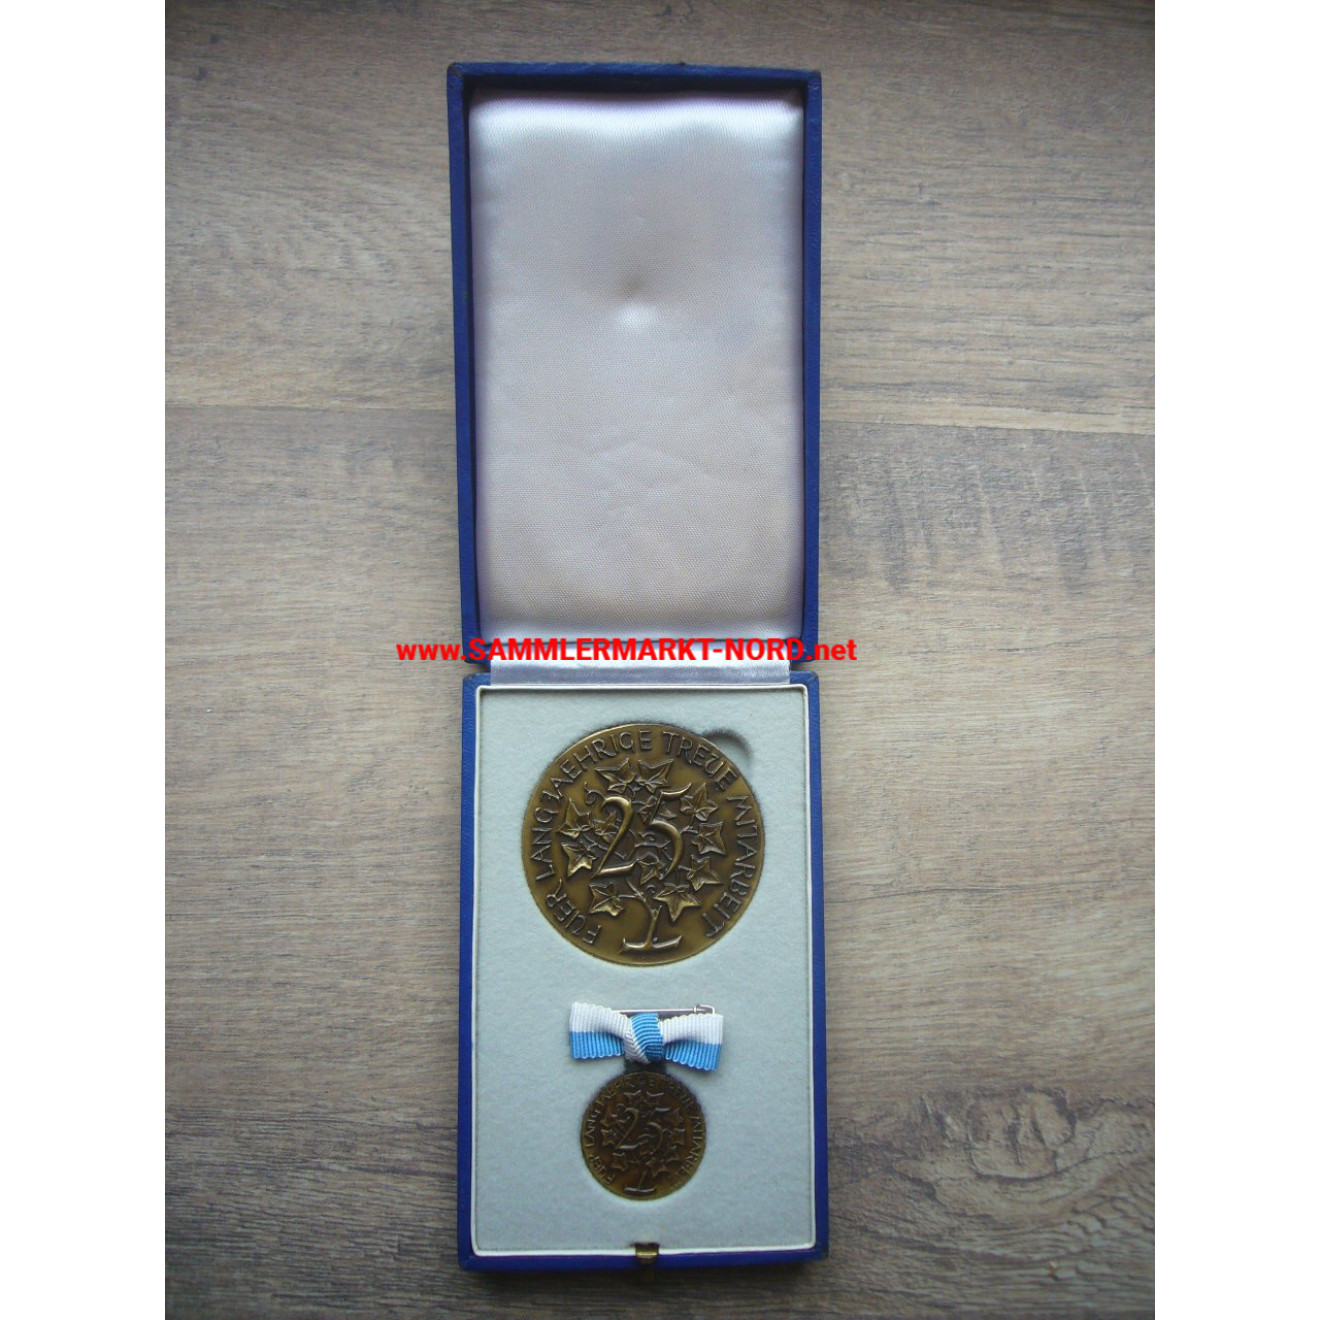 Board of Trustees of the Bavarian Employers' Association - Medal for 25 years of service